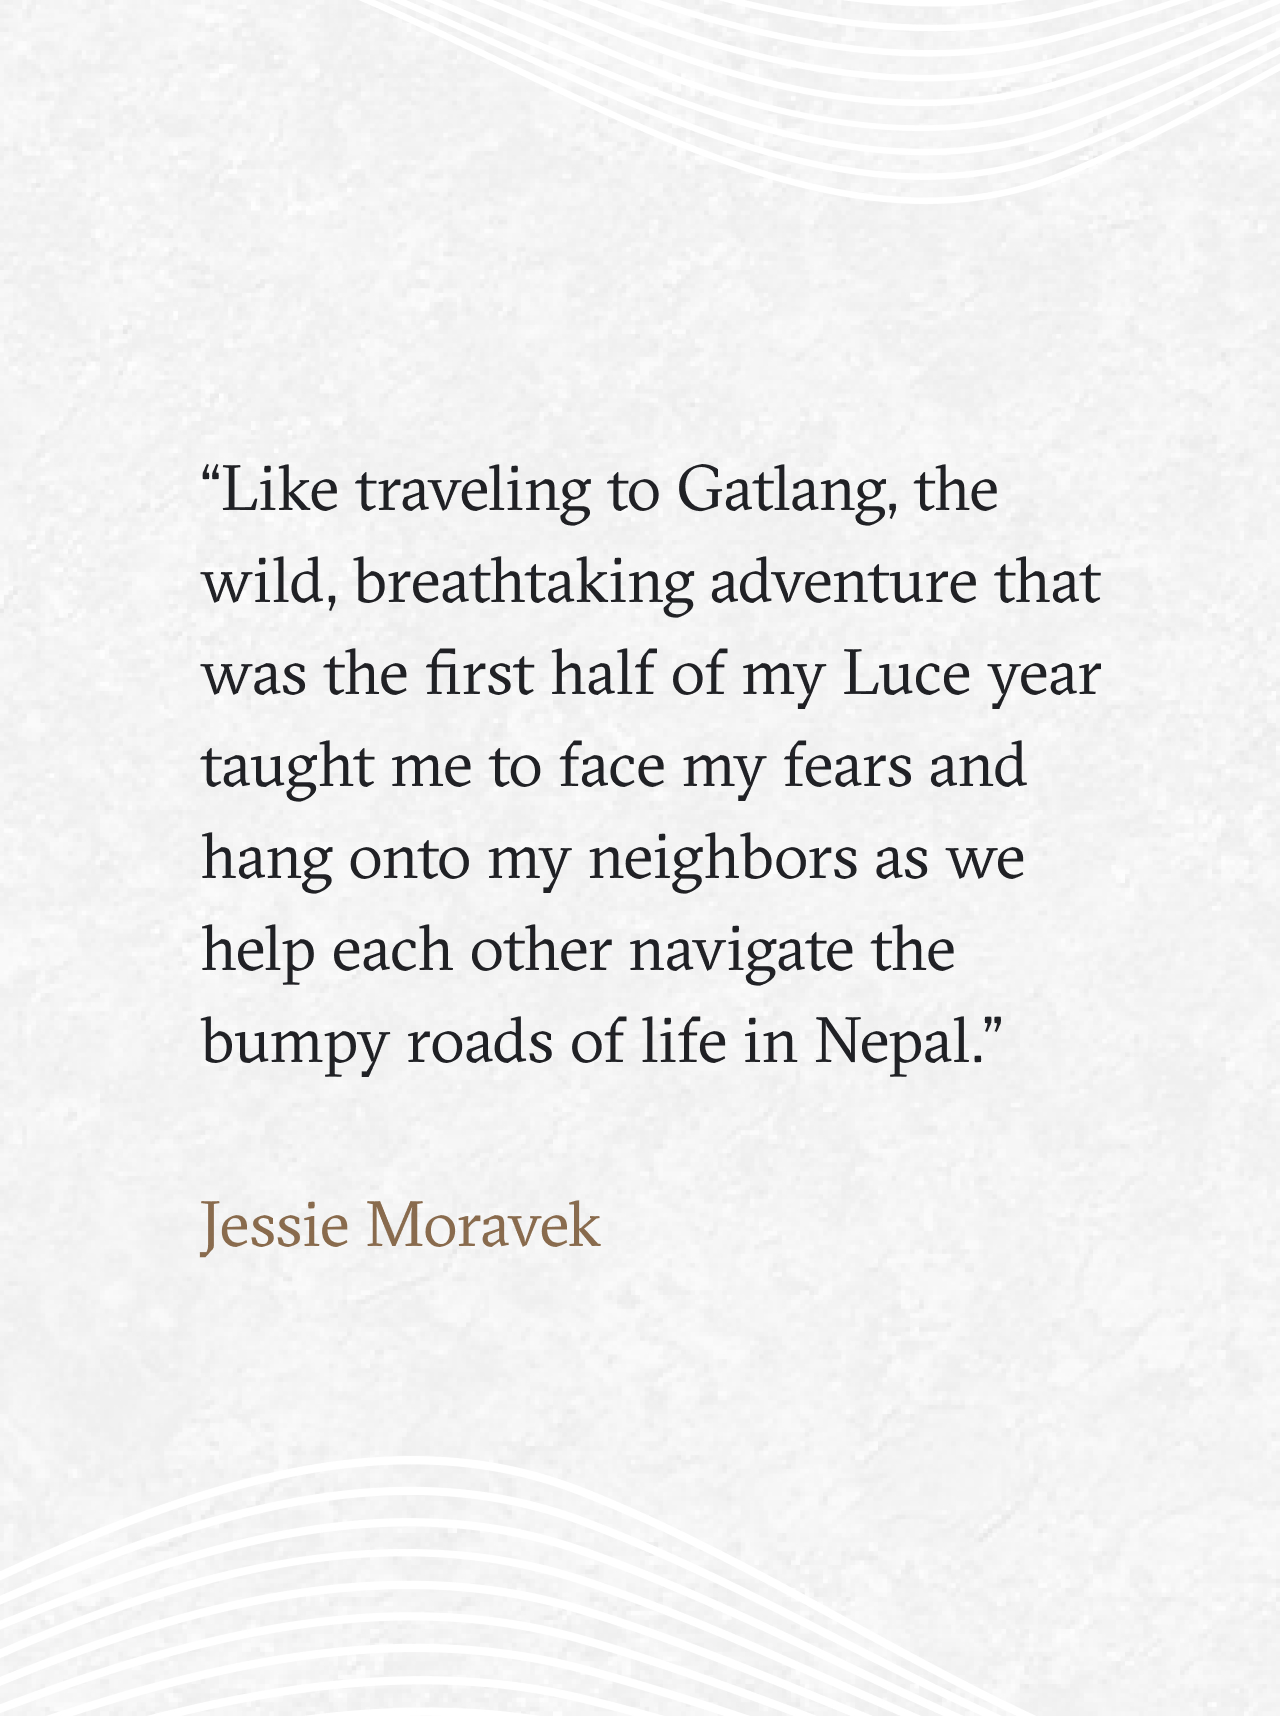 Henry Luce Foundation website quote from jessie moravek screenshot